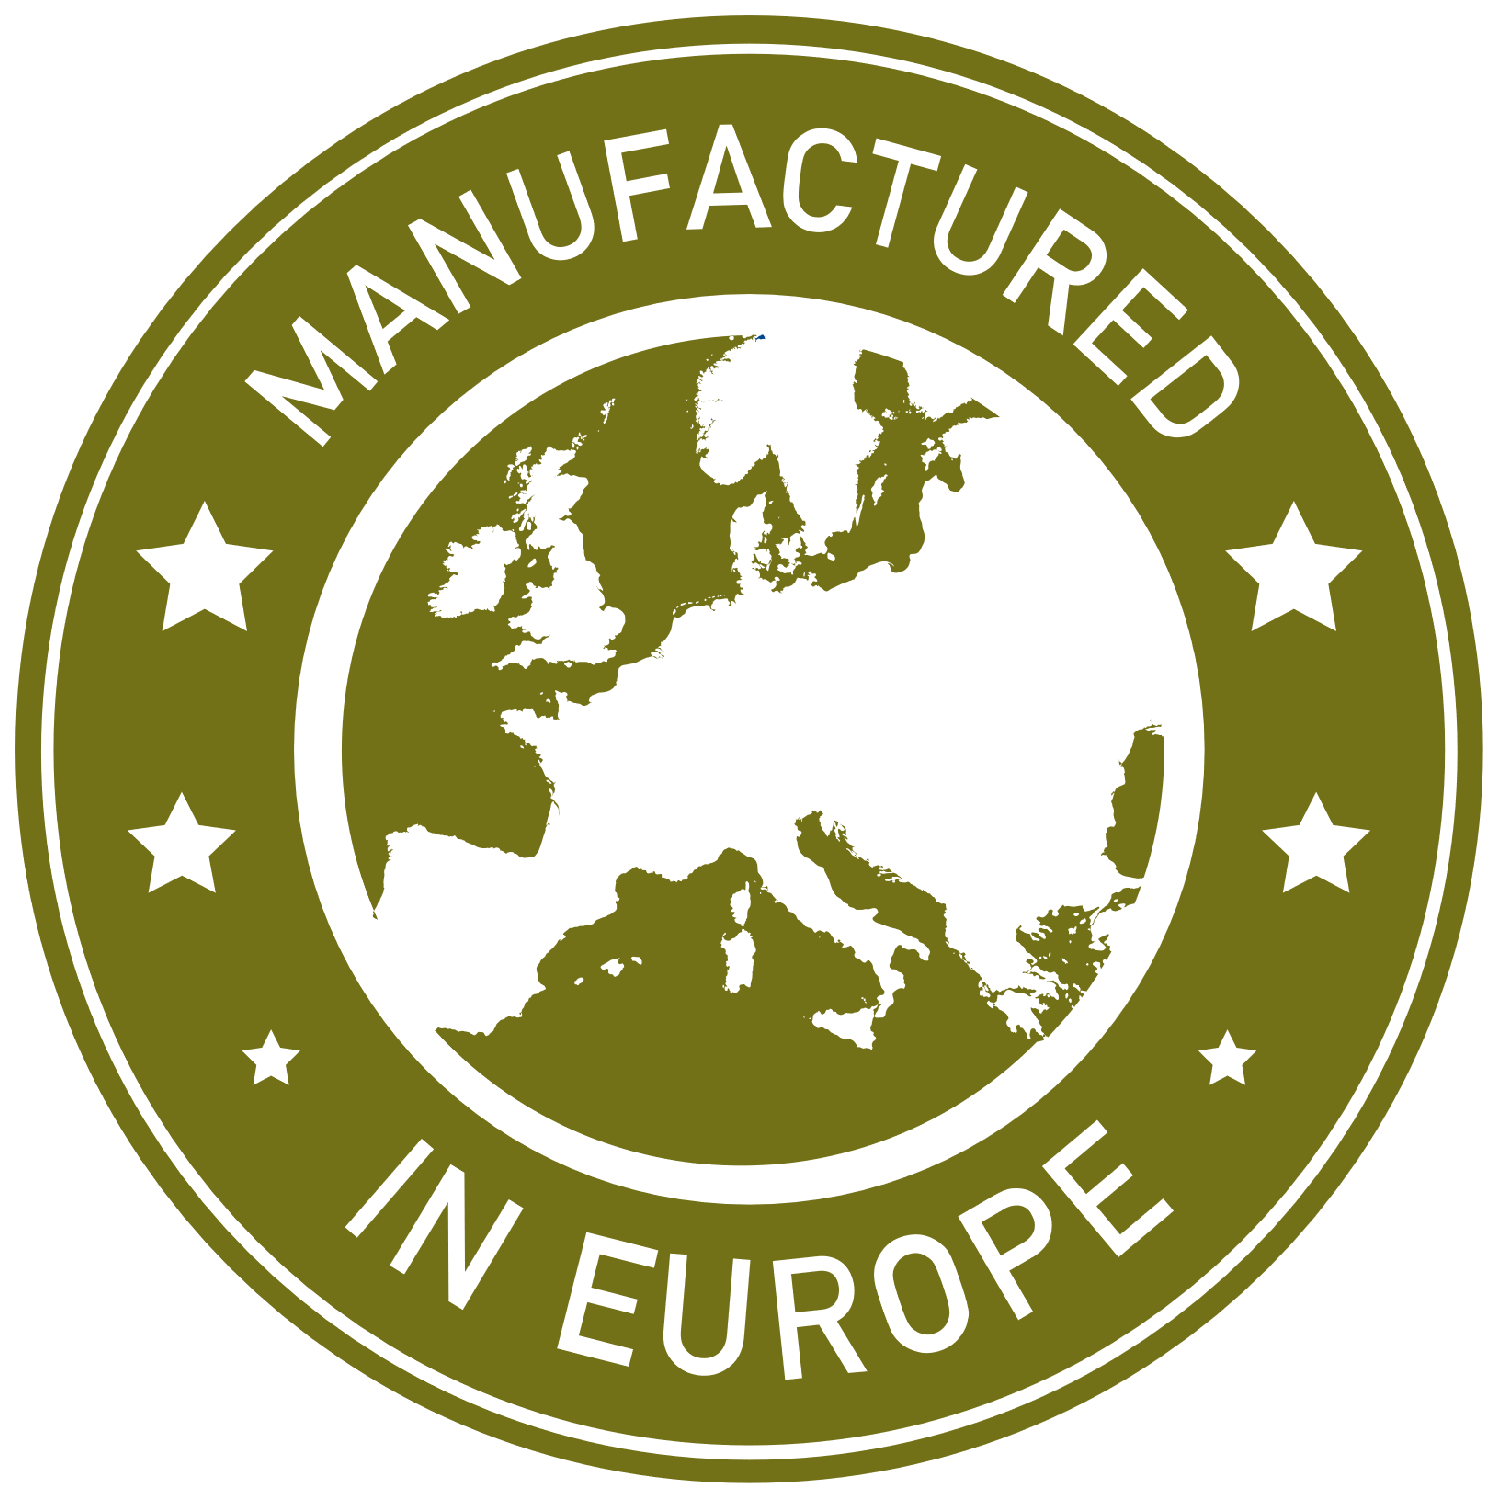 Manufactured in Europe